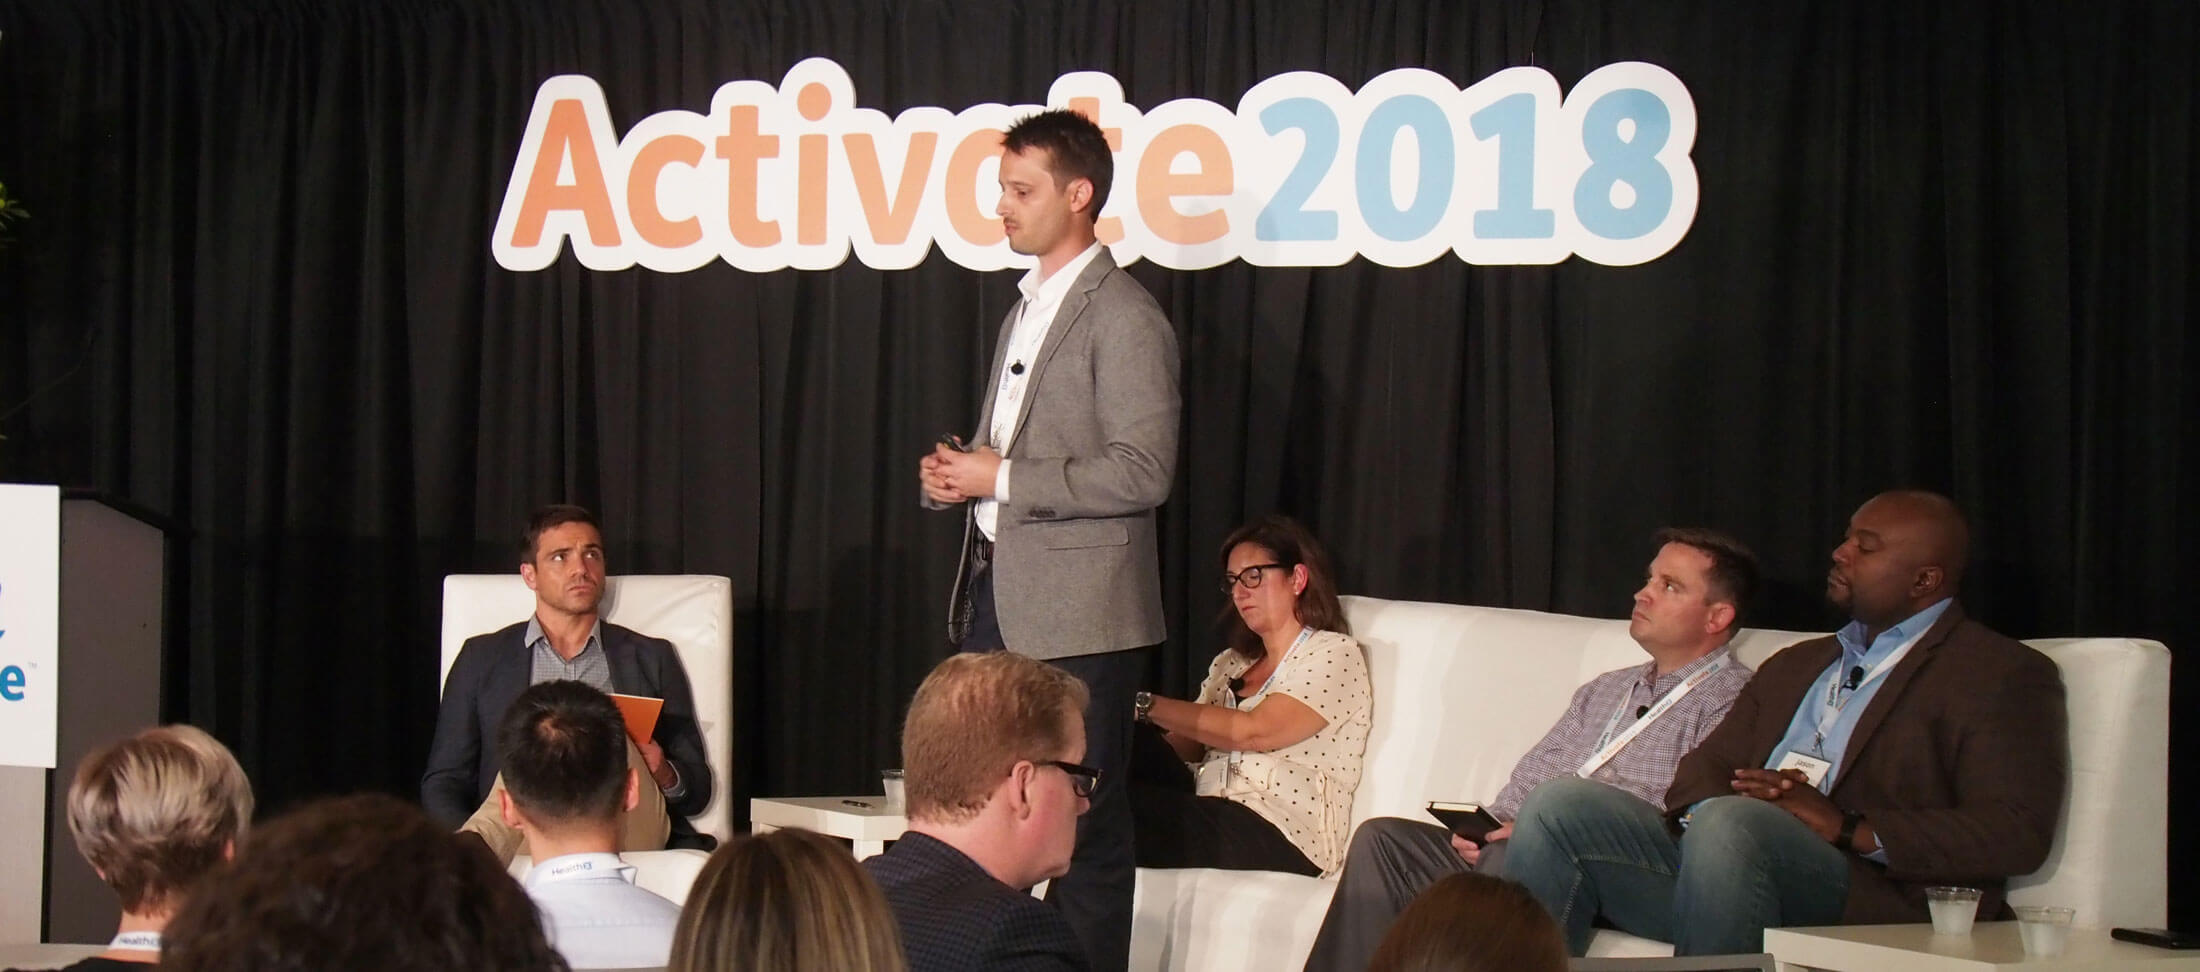 Activate2018: Key Themes and Highlights